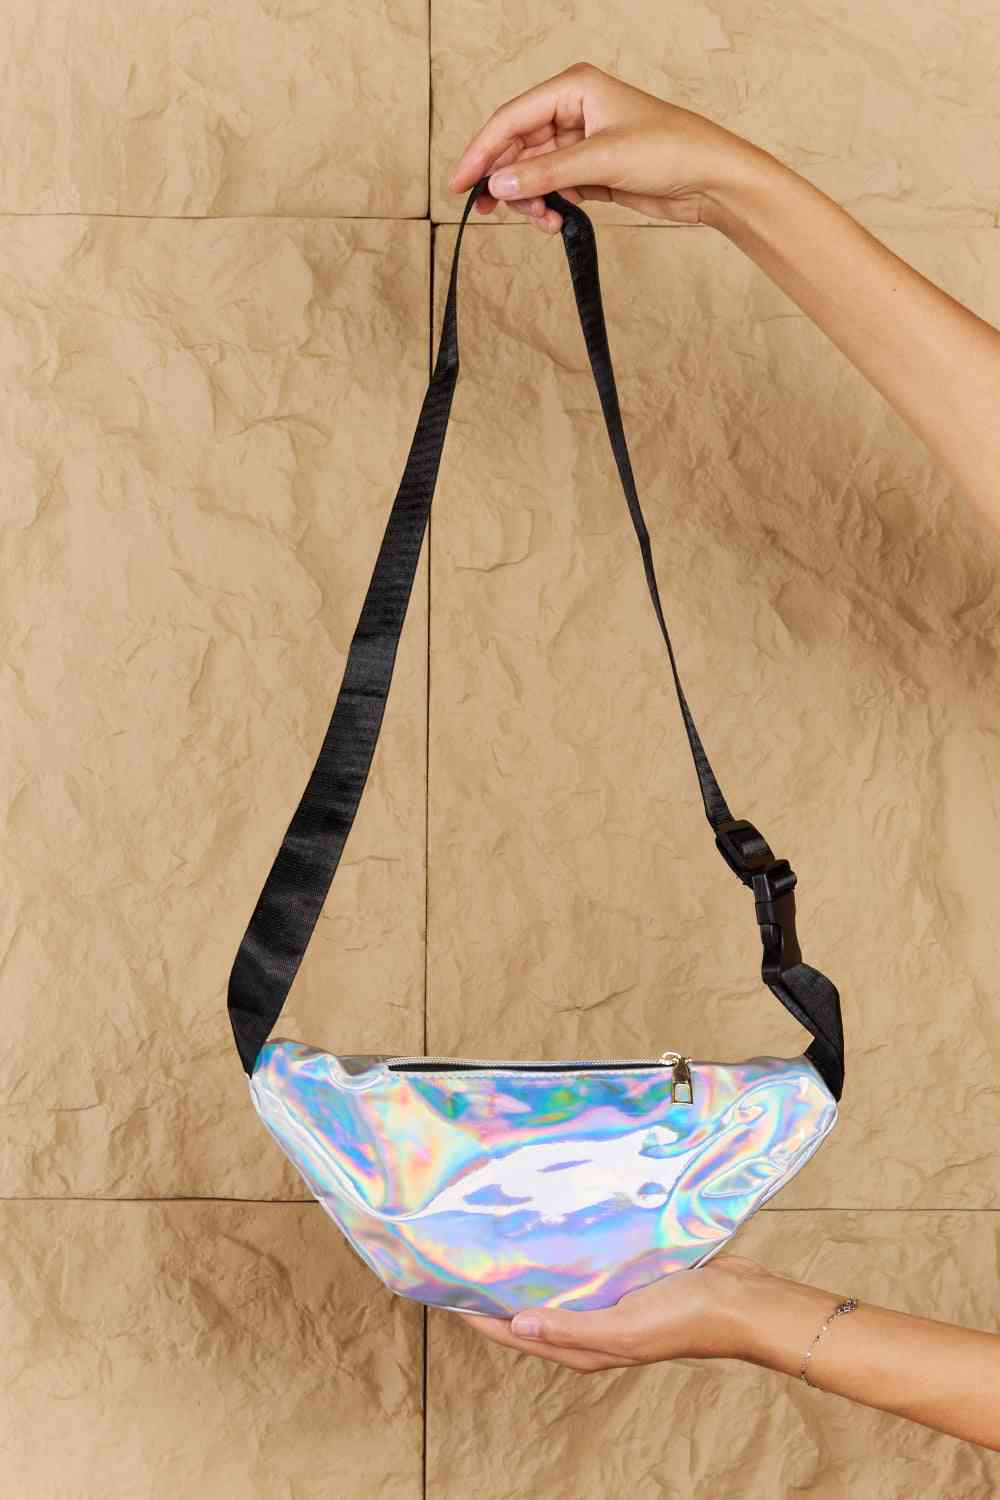 Tan Fame Good Vibrations Holographic Double Zipper Fanny Pack in Silver Clothing